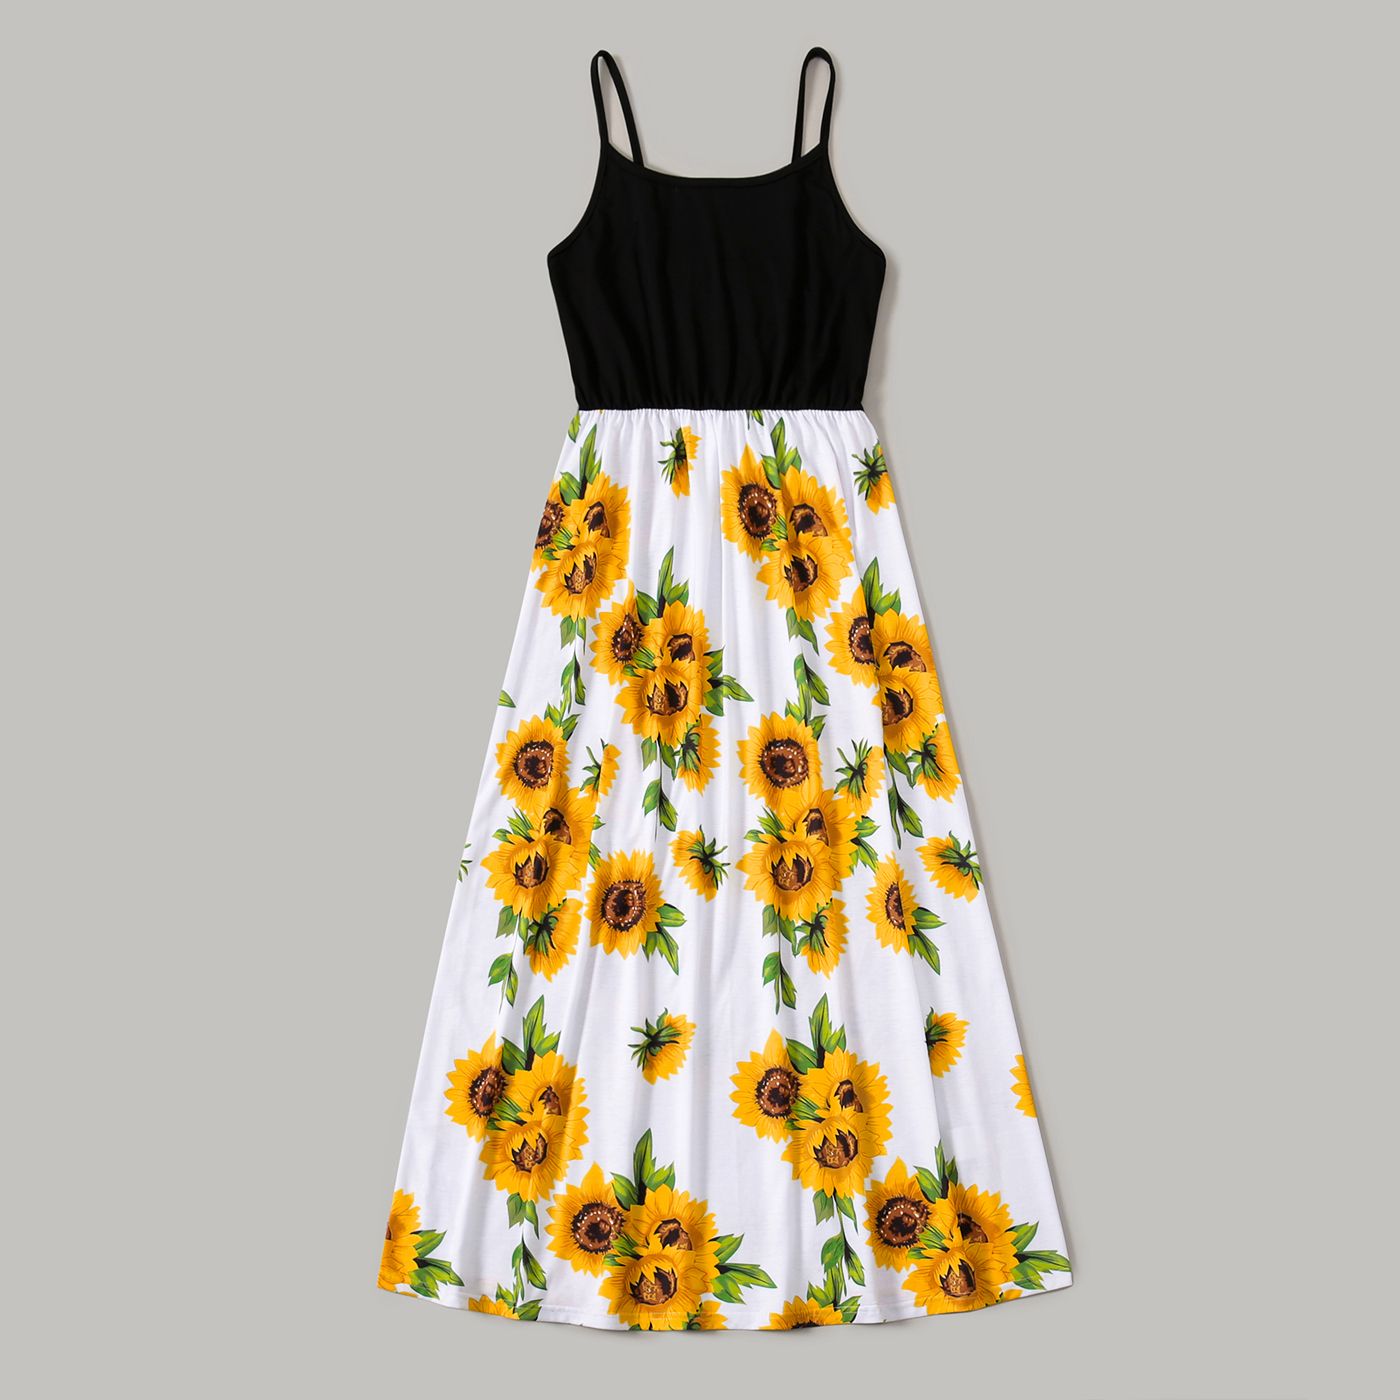 Family Matching Solid Spaghetti Strap Splicing Sunflower Floral Print Dresses And Short-sleeve T-shirts Sets